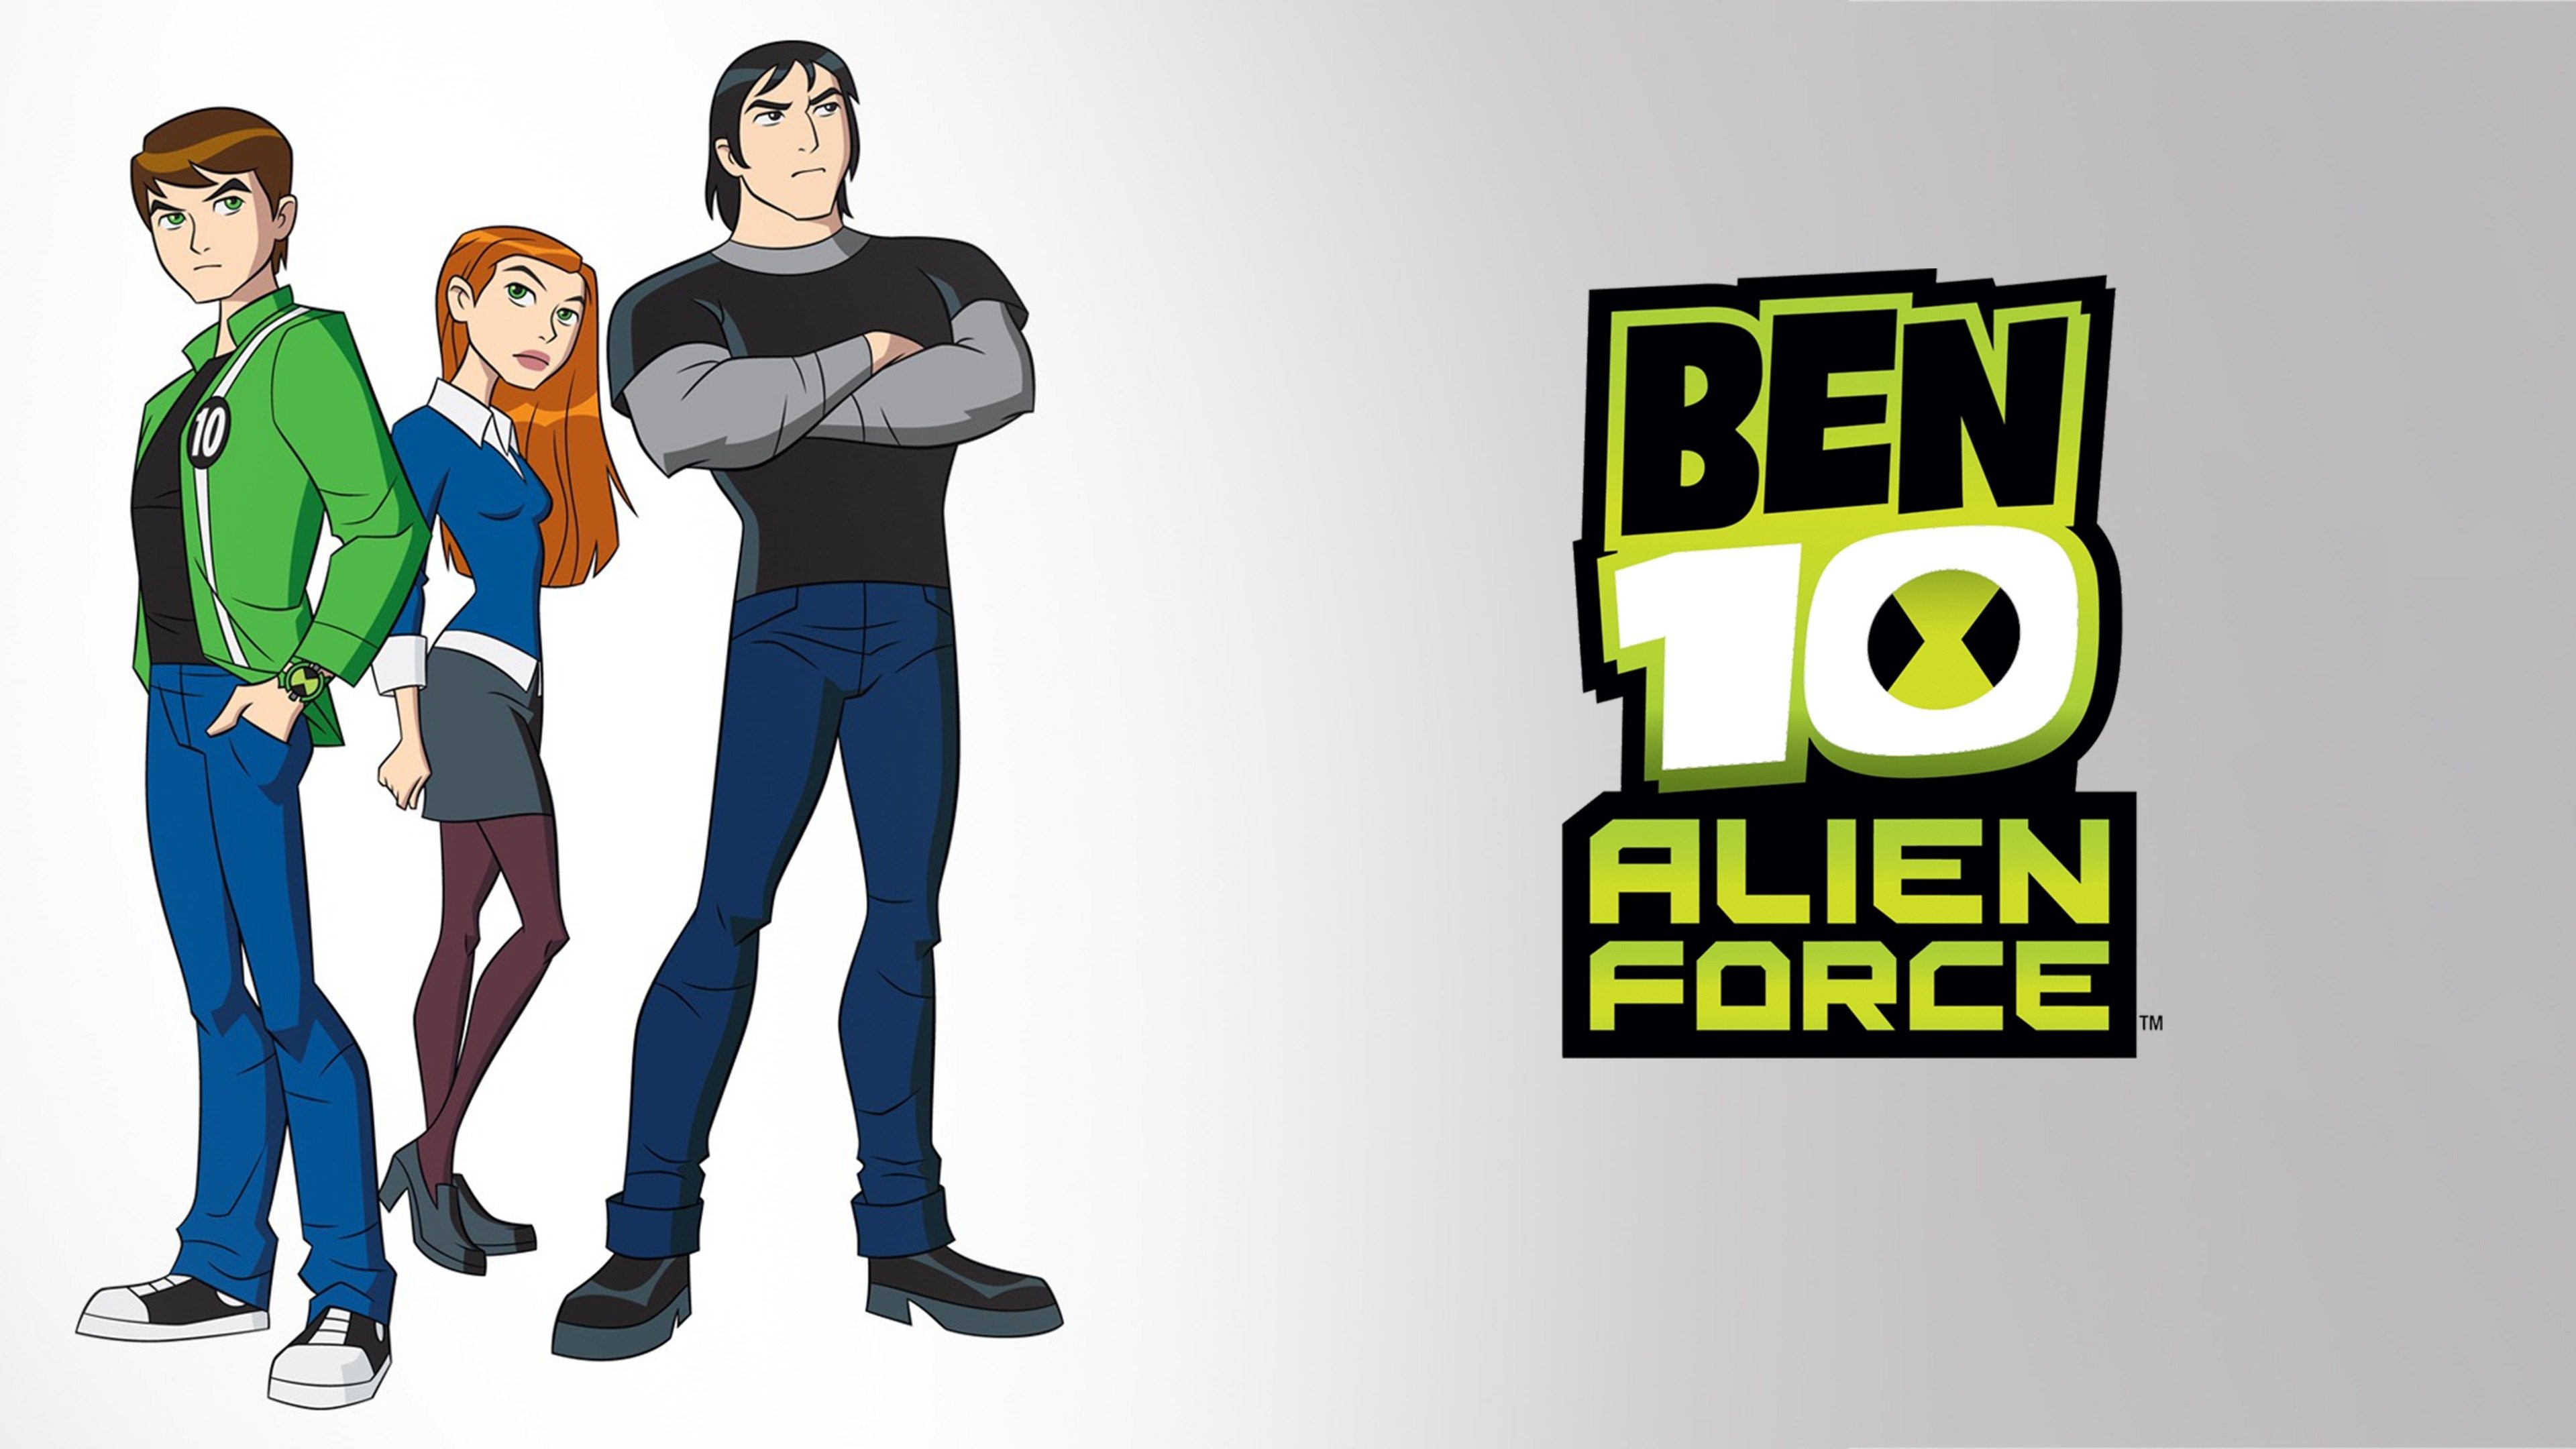 Which Ben 10 Alien Force Character Are You? - ProProfs Quiz